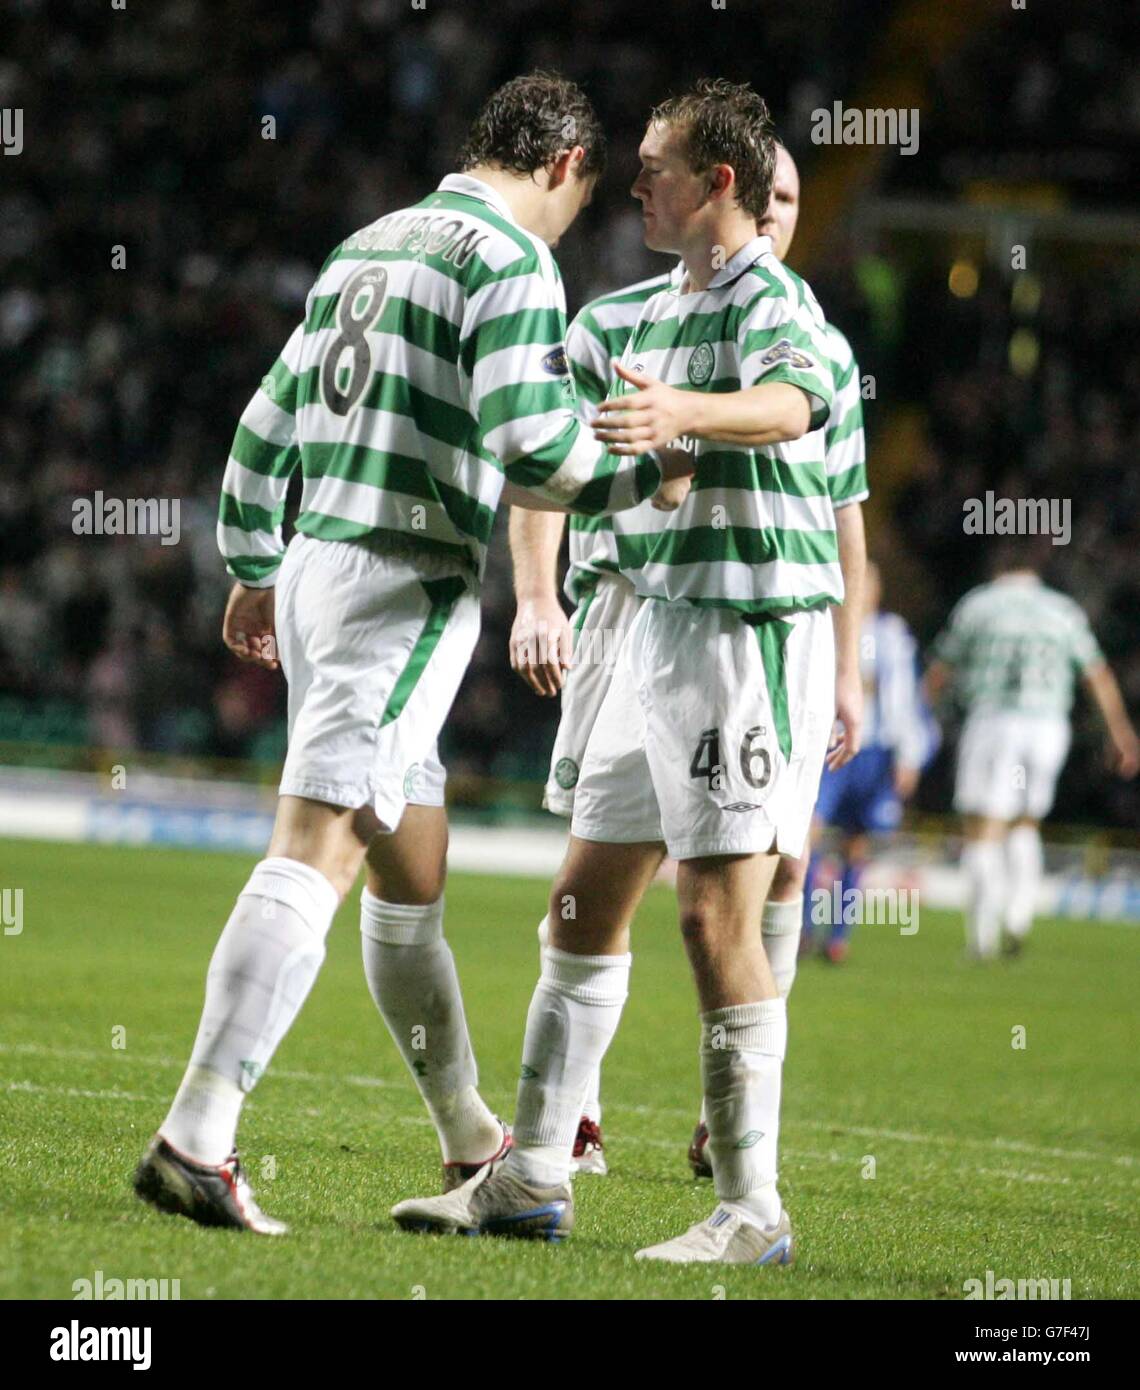 Celtic's Alan Thompson (left) celebrates with team-mate Aiden McGeady after scoring against Kilmarnock during the Bank of Scotland Premier League match at Hampden Park, Glasgow, Saturday, November 6, 2004. EDITORIAL USE ONLY. Stock Photo